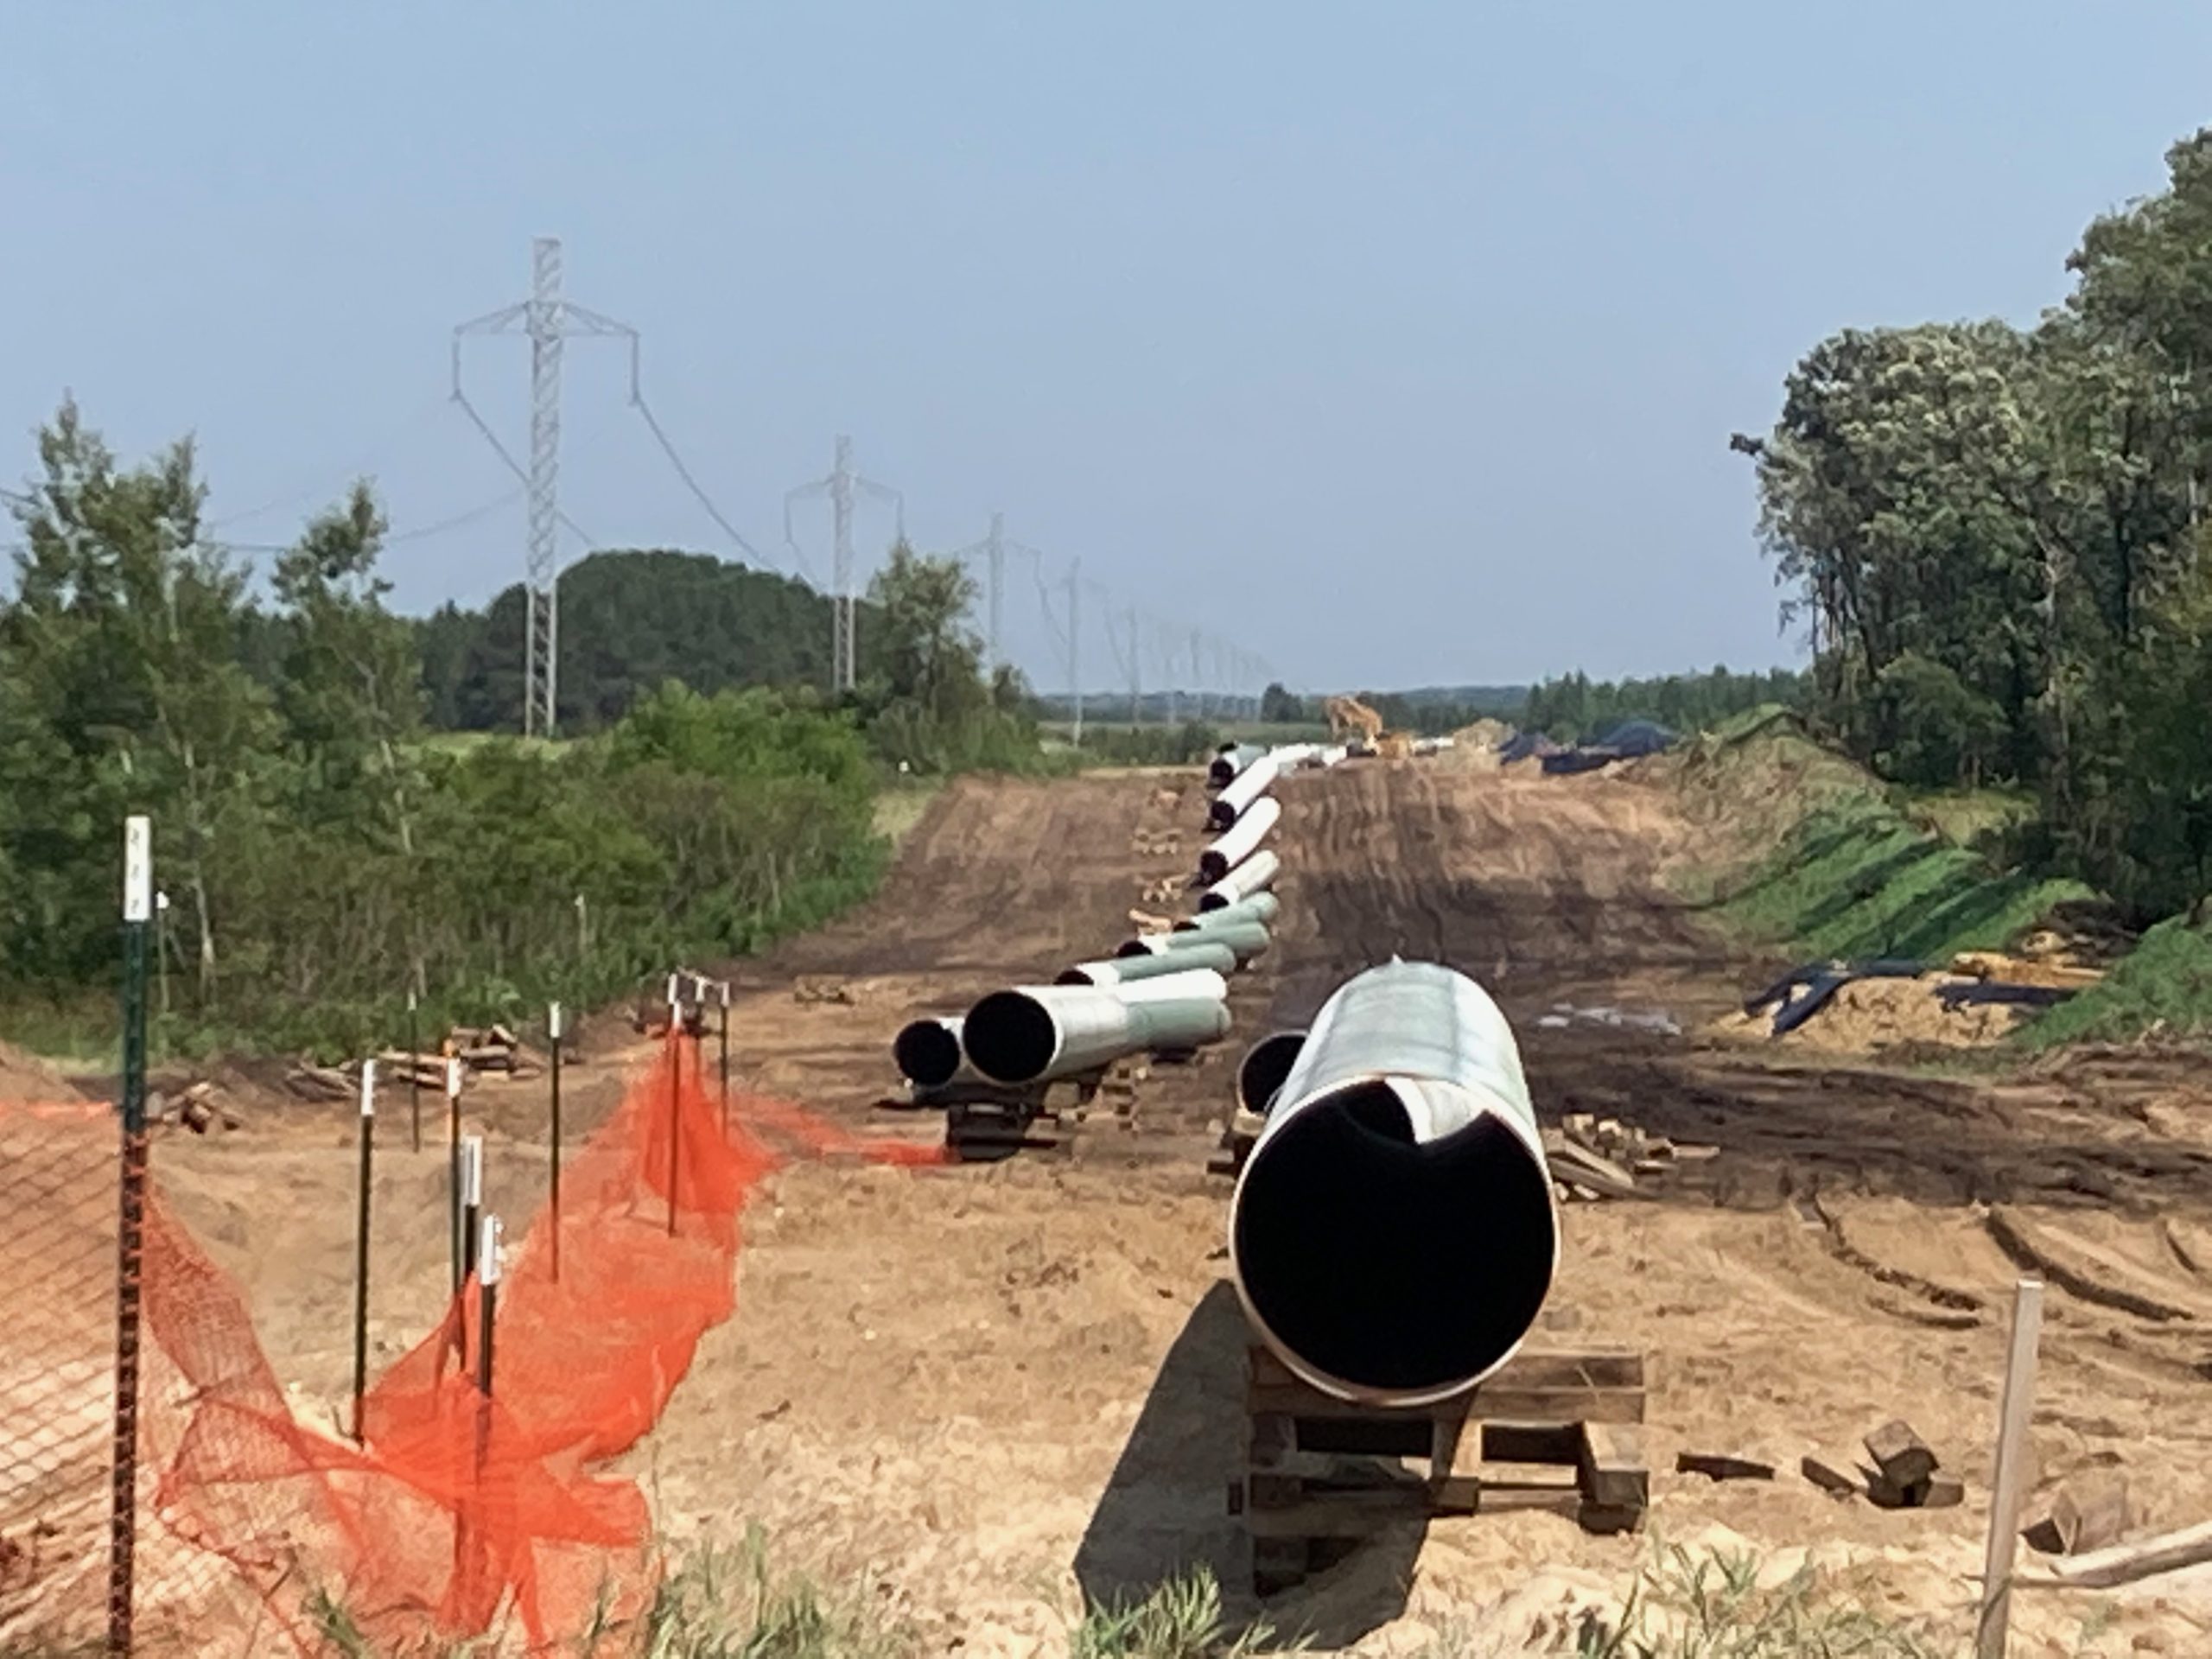 Enbridge pipes ready to be welded and trenched into the ground in Wadena County, Minnesota.